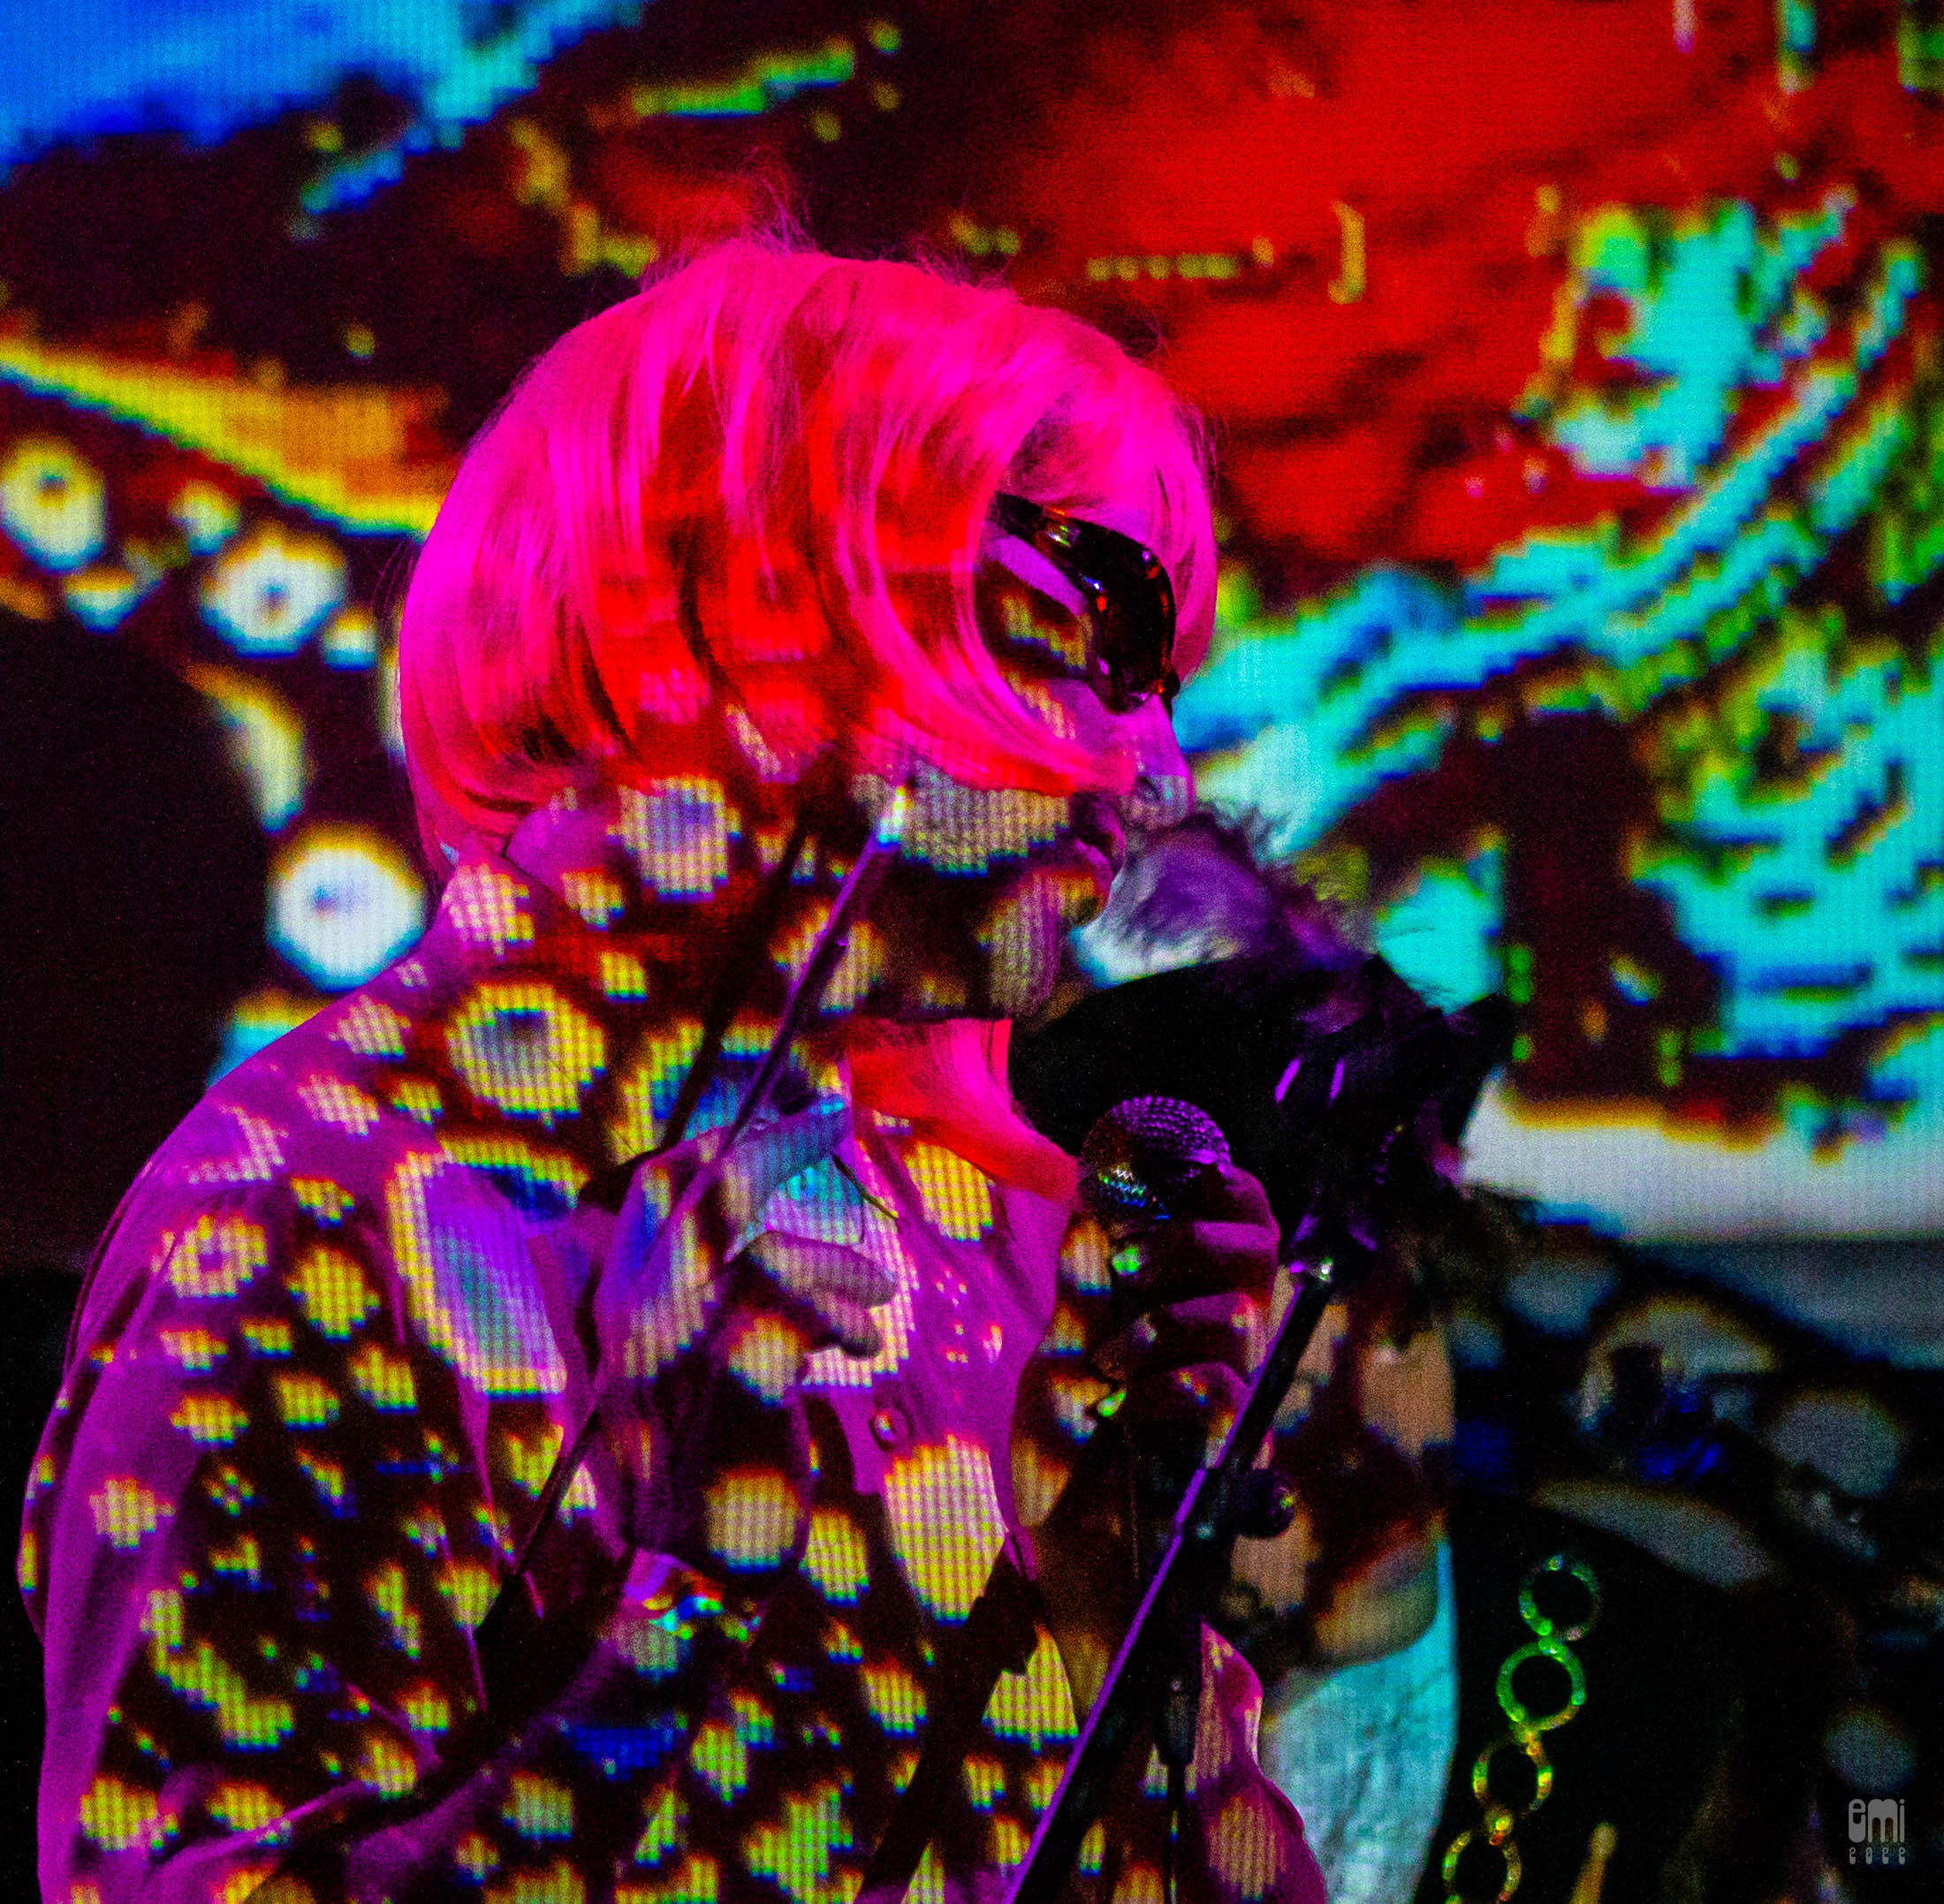 20221031 Sold Out Halloween Extravaganza with Drugdealer and Mad Alchemy Liquid Light Show at The Chapel SF. photo by emi